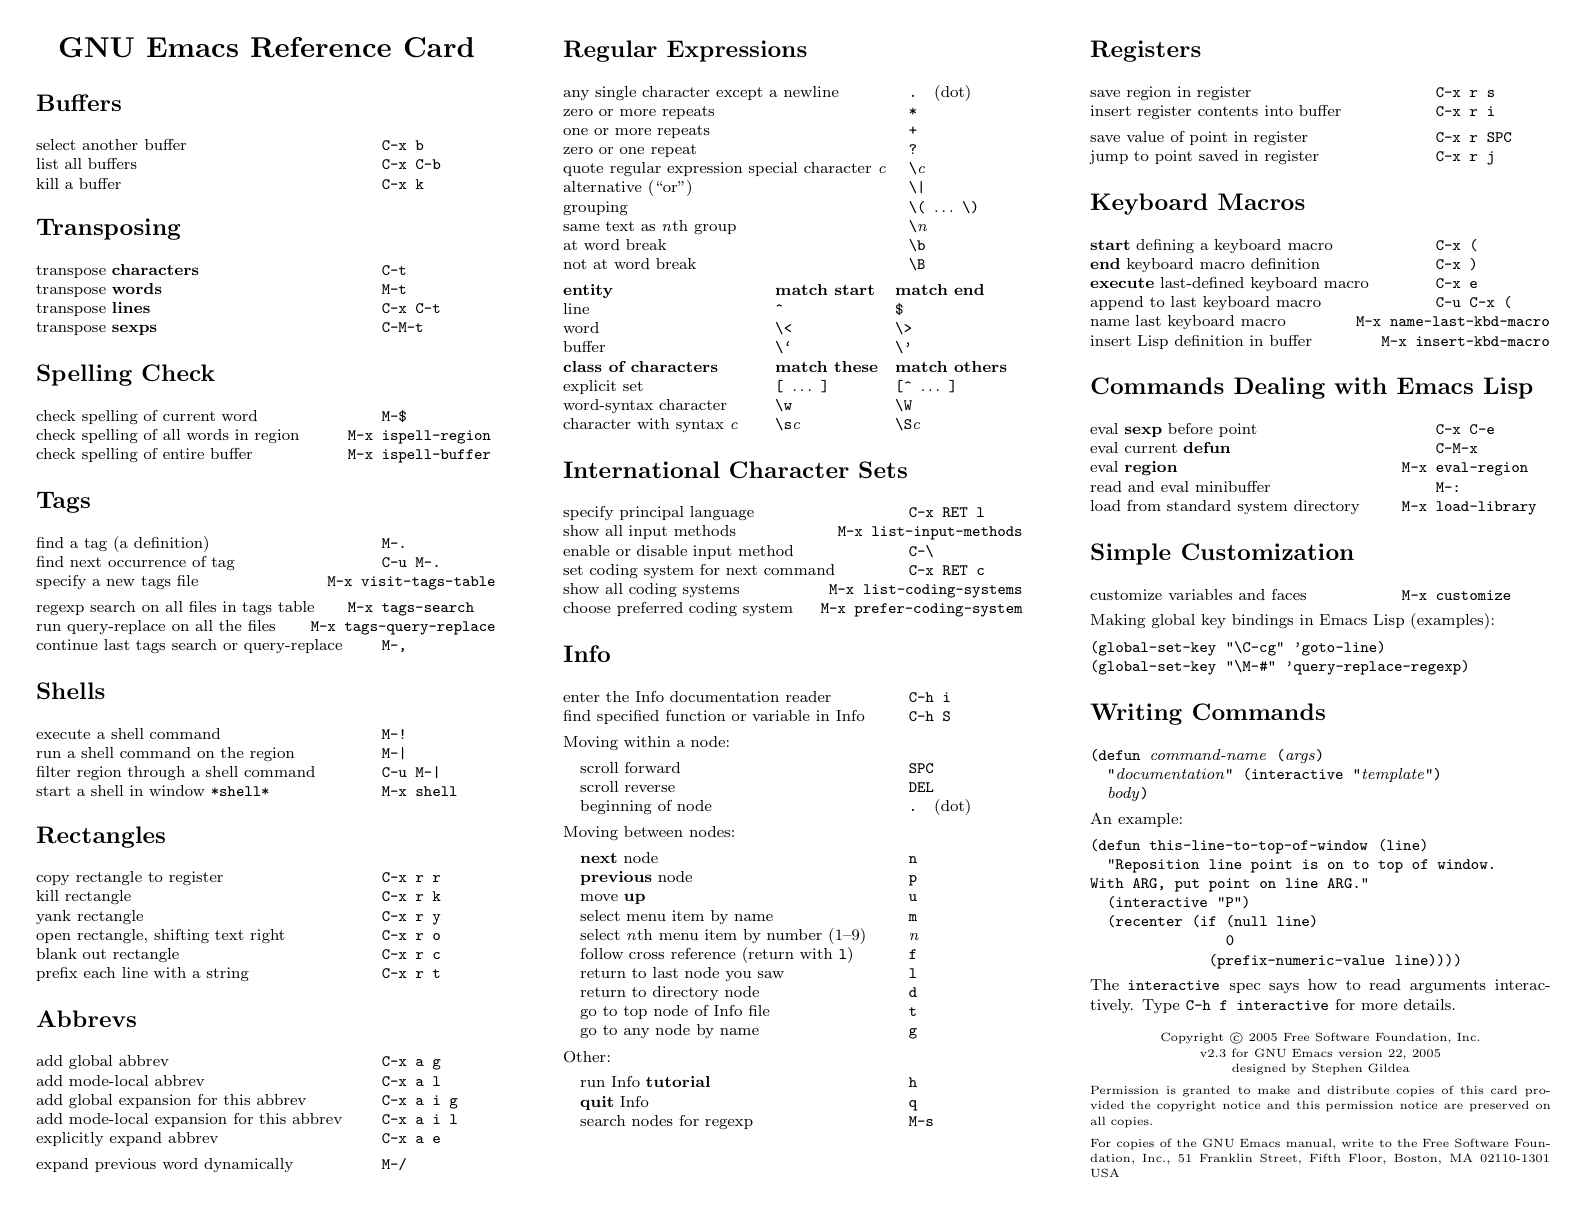 ./photo/GNU Emacs Reference Card.png